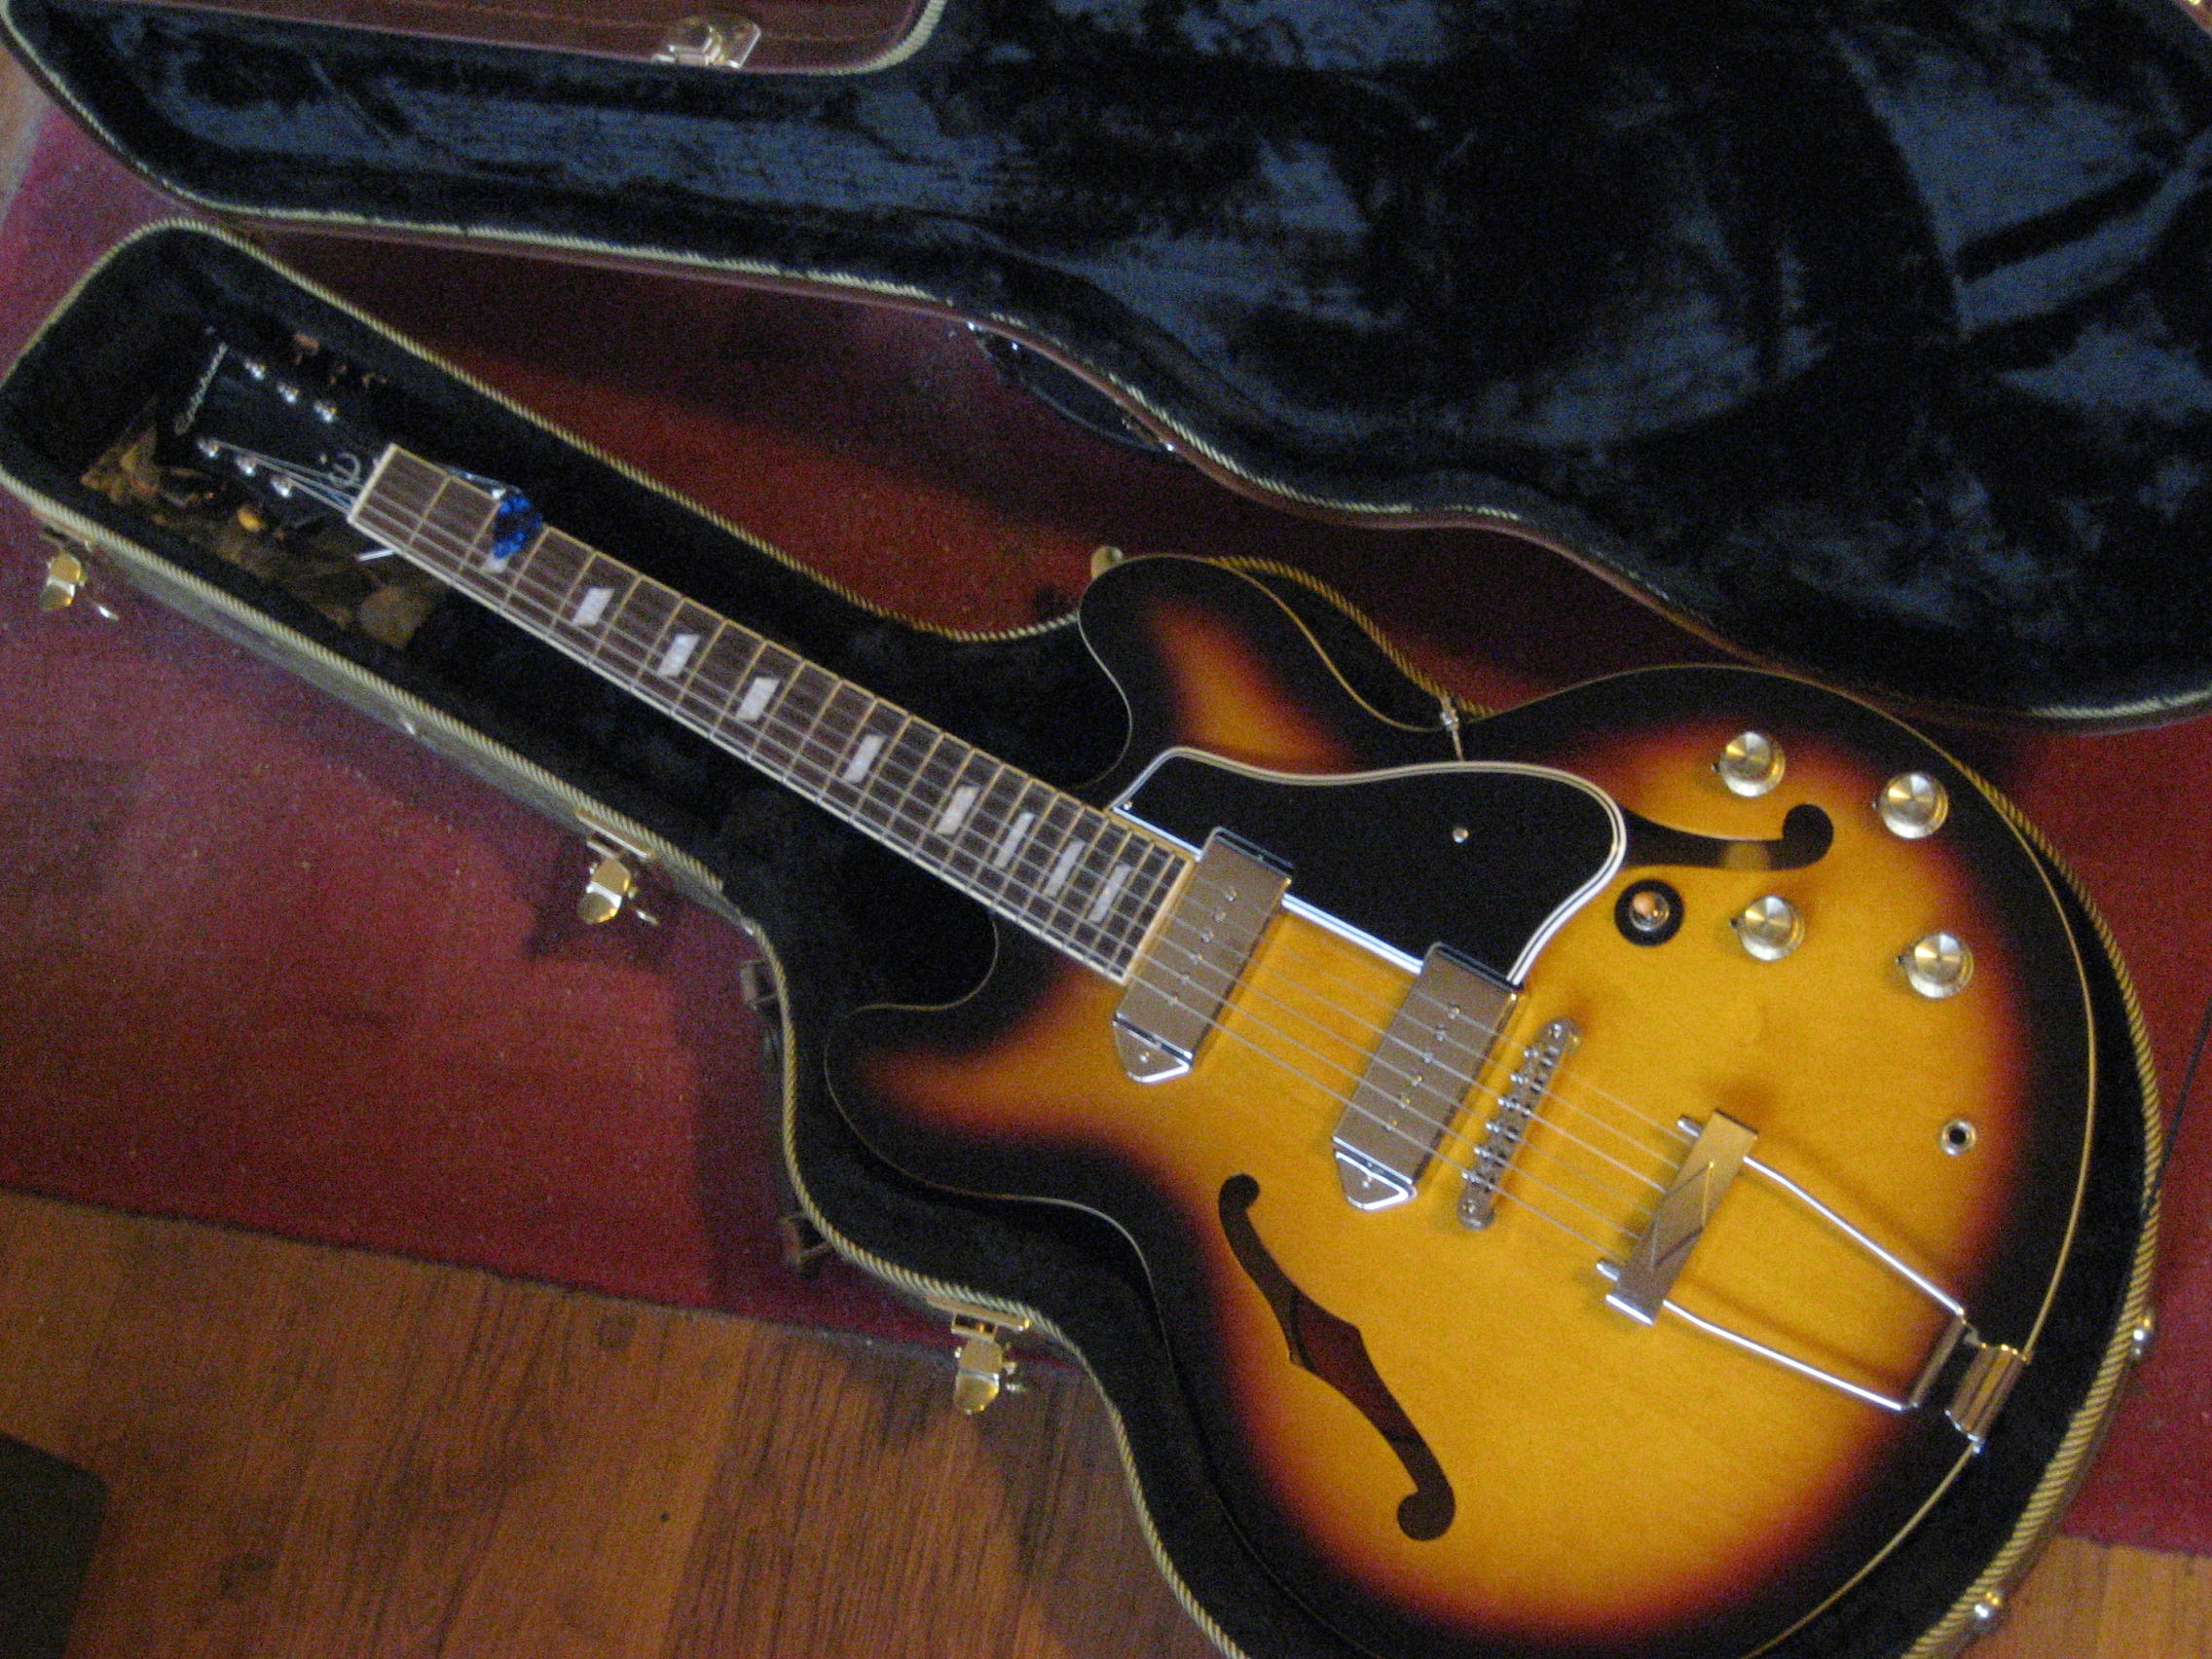 Swow your Epiphone Casino, Sheraton, Riviera,  | The Gear Page